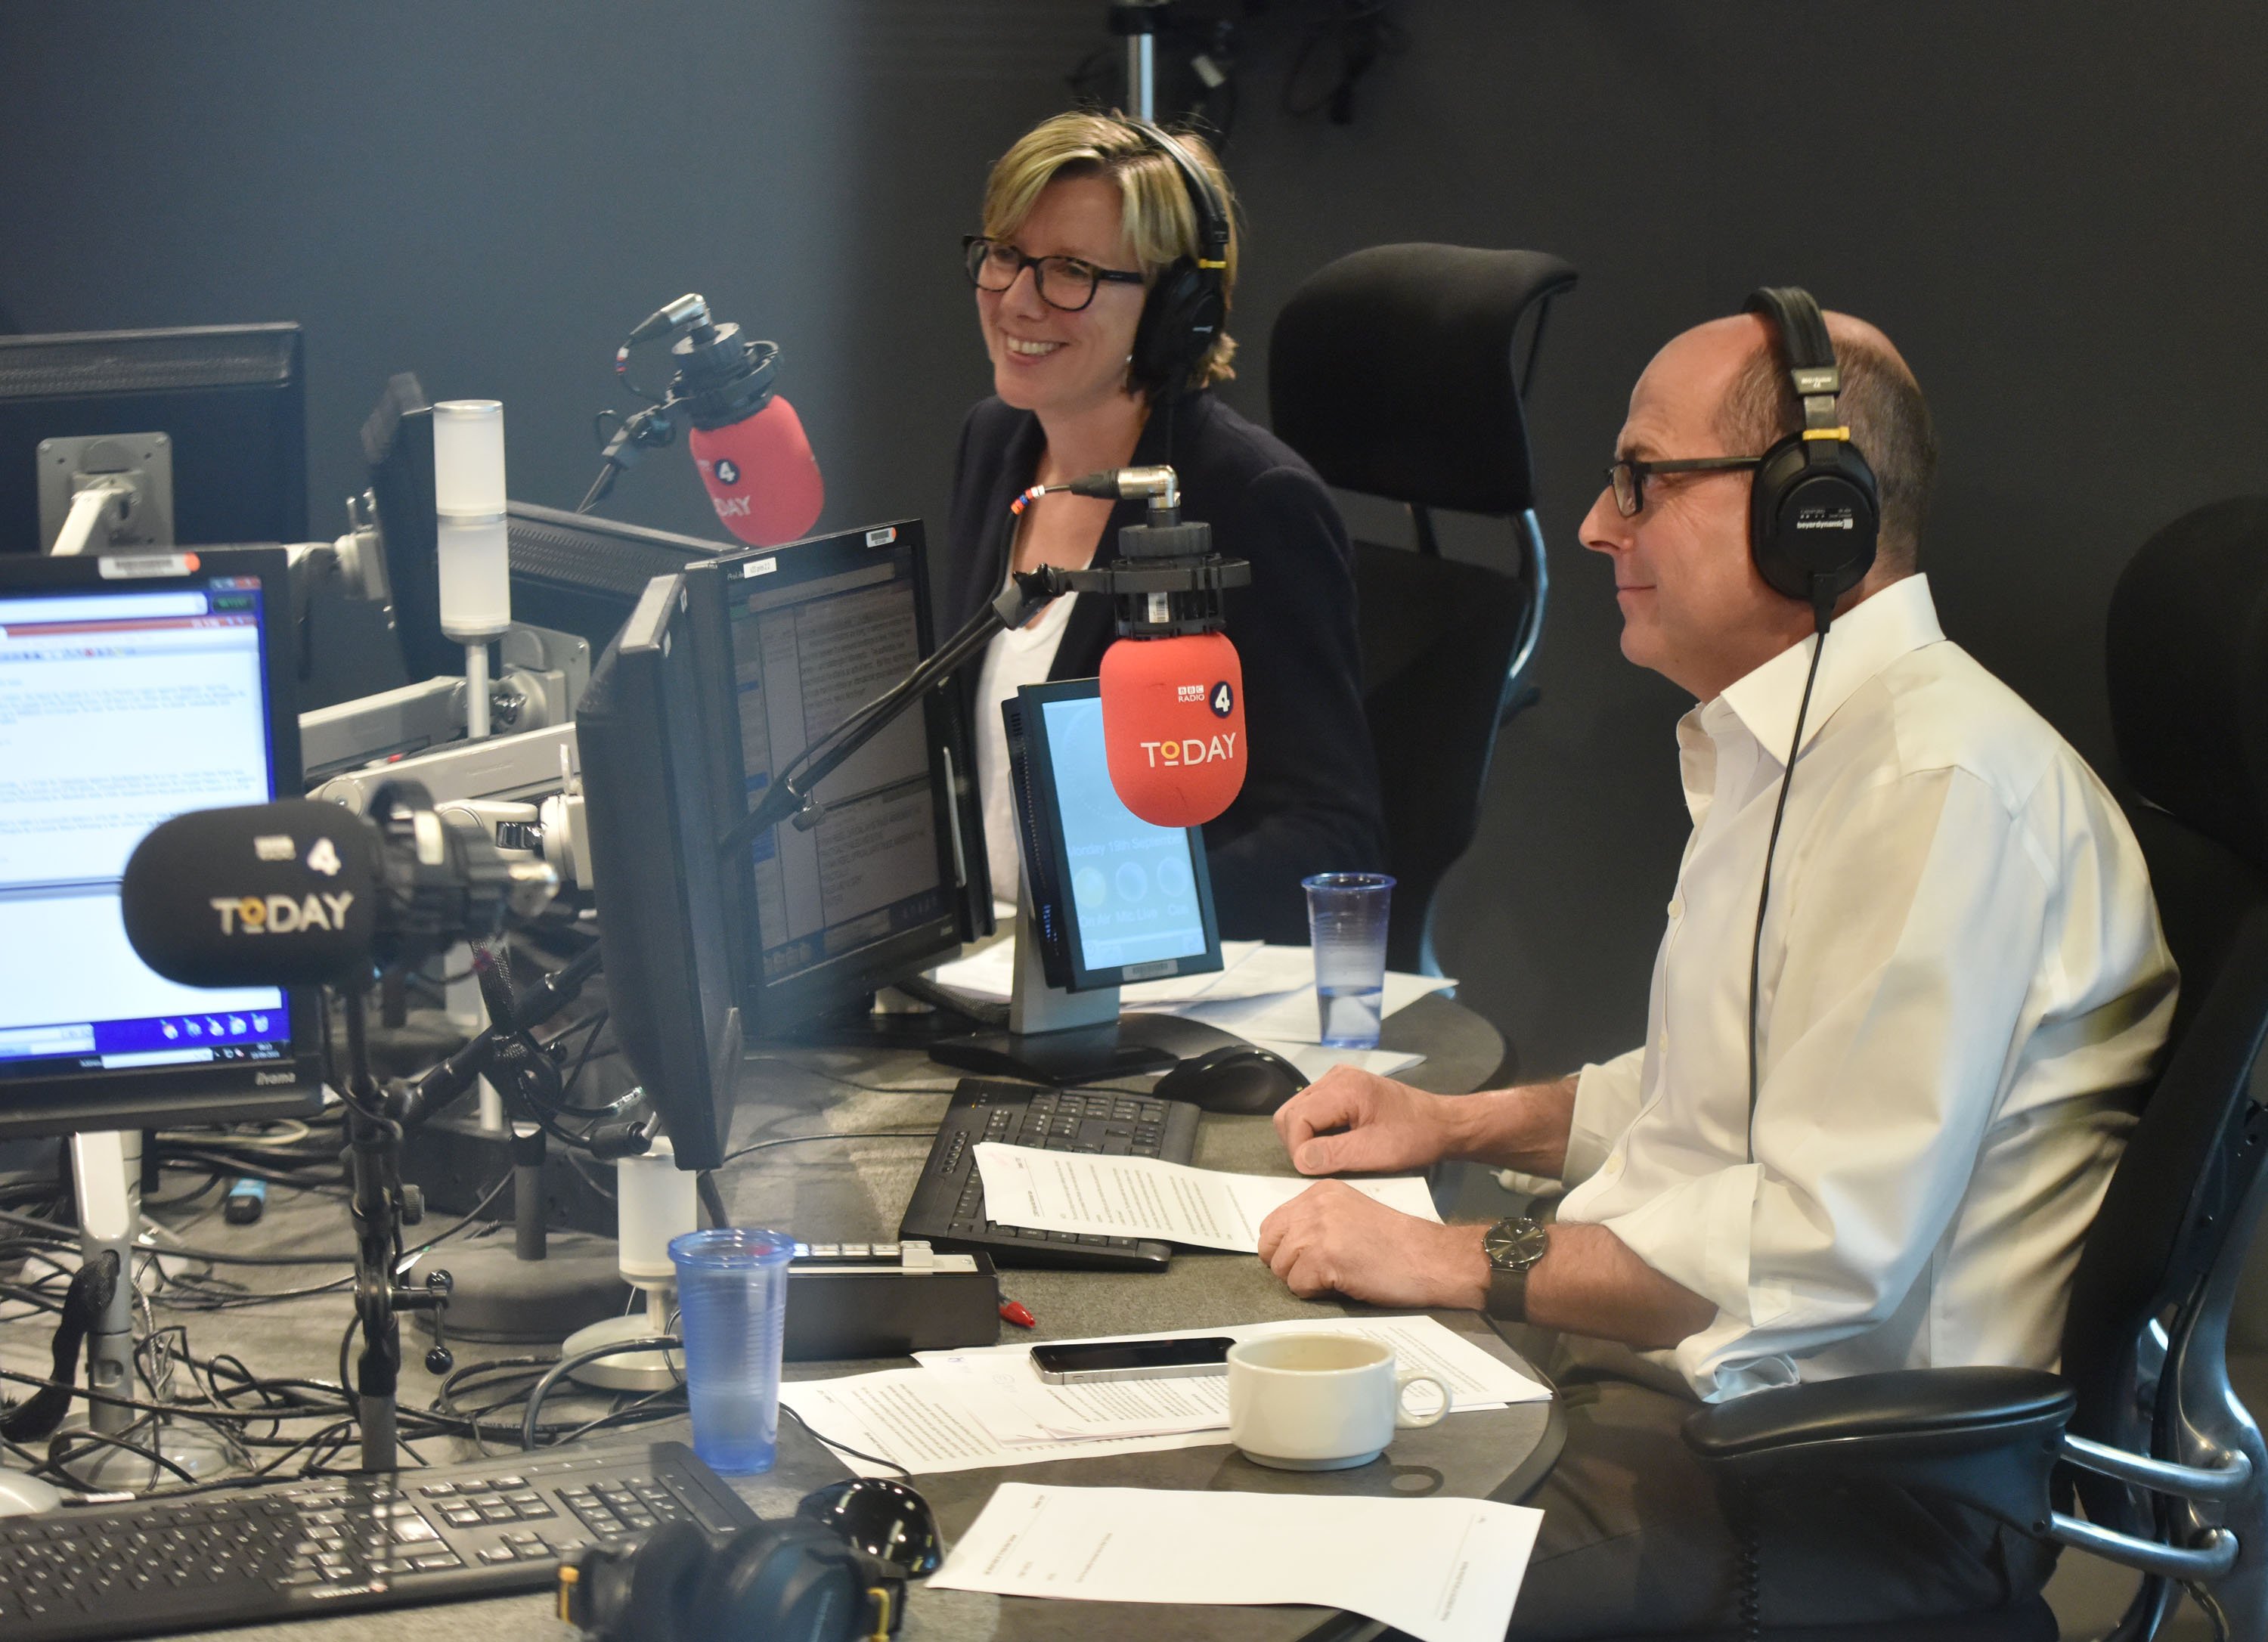 BBC Radio 4 Today on Twitter: "Morning. Today's presenters are  @Sarah_Montague and @bbcnickrobinson. Listen live here:  https://t.co/R26I0v7IfI and join the conversation using #r4today  https://t.co/nCHyRDzKaj" / Twitter